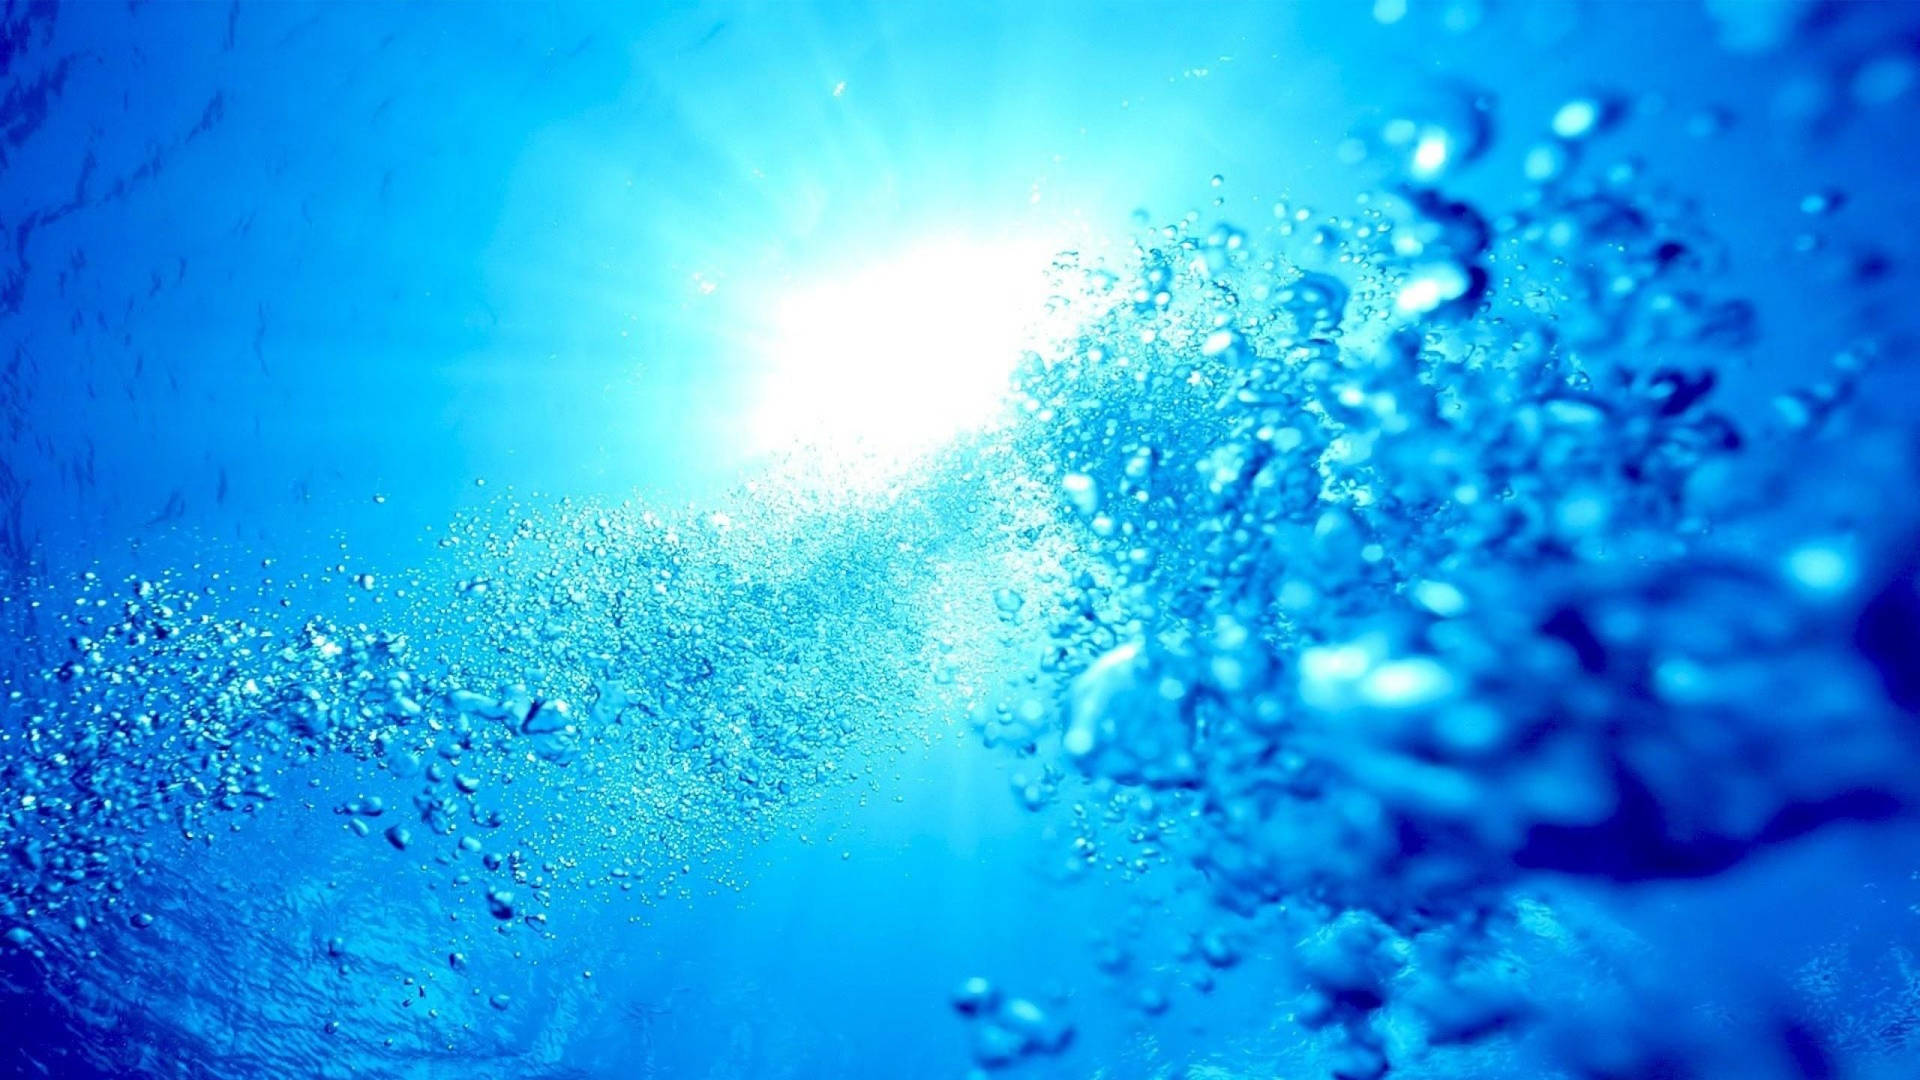 Underwater Light And Air Bubbles Background